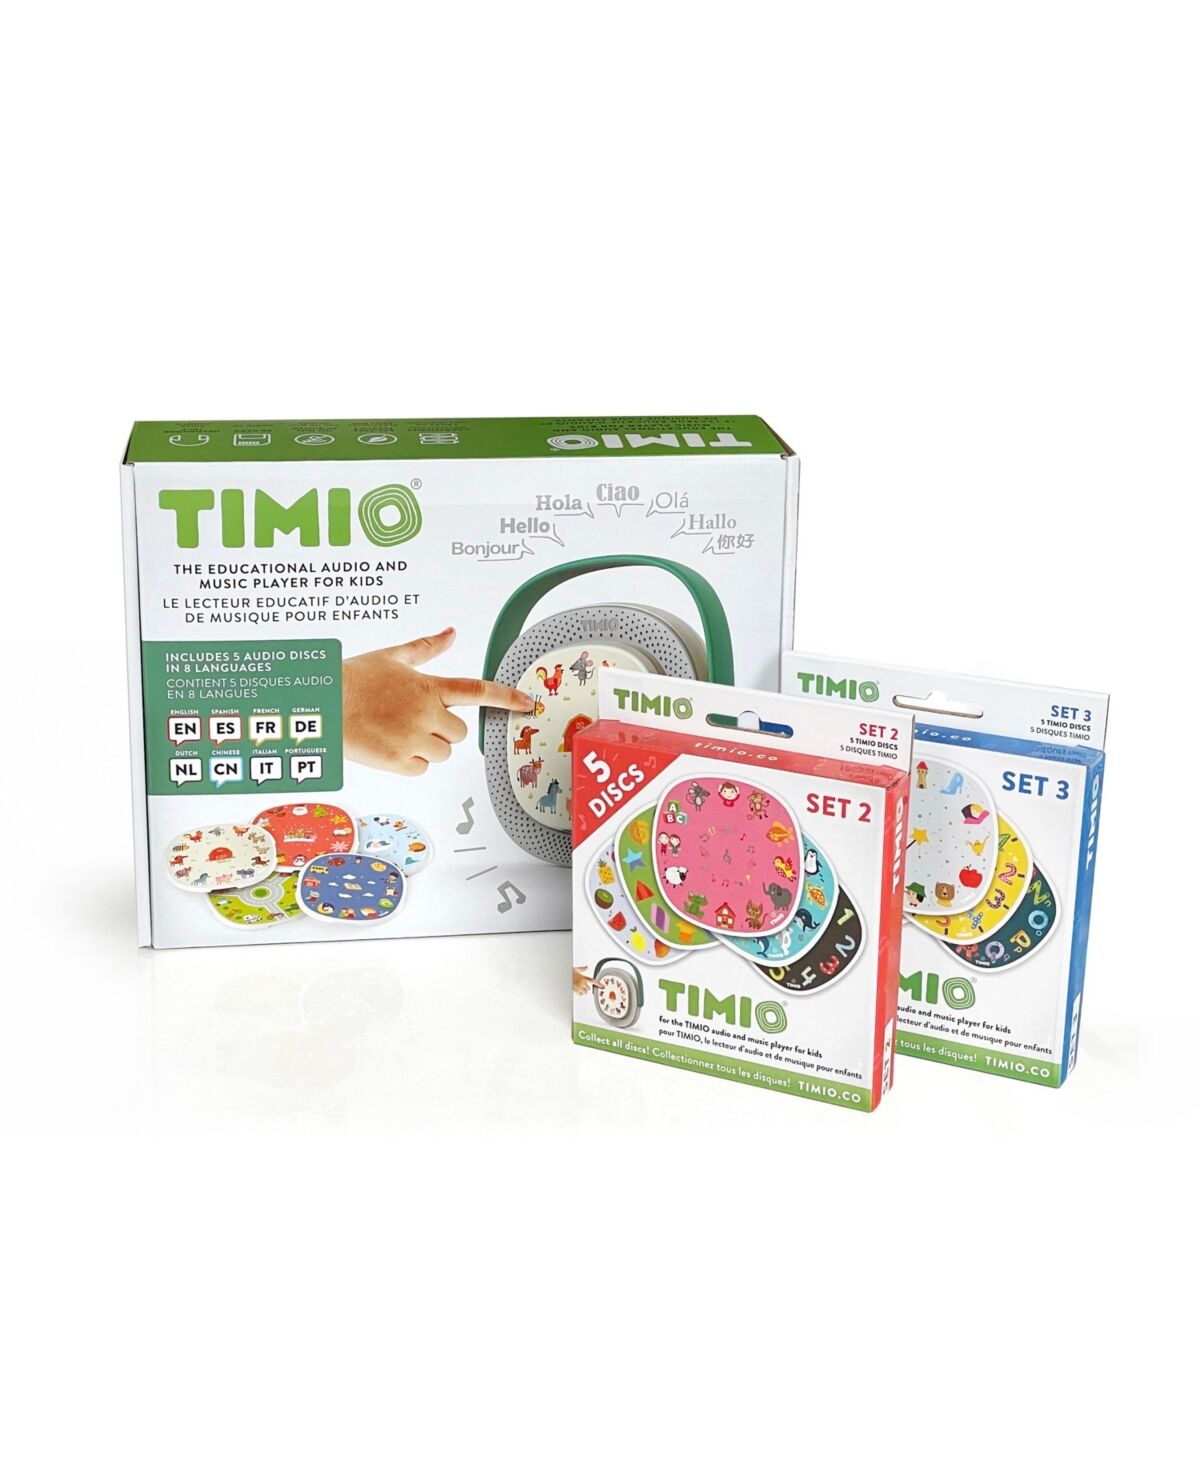 Timio Screenless Educational Audio and Music Player + 2 Disc Packs 15 discs total - White